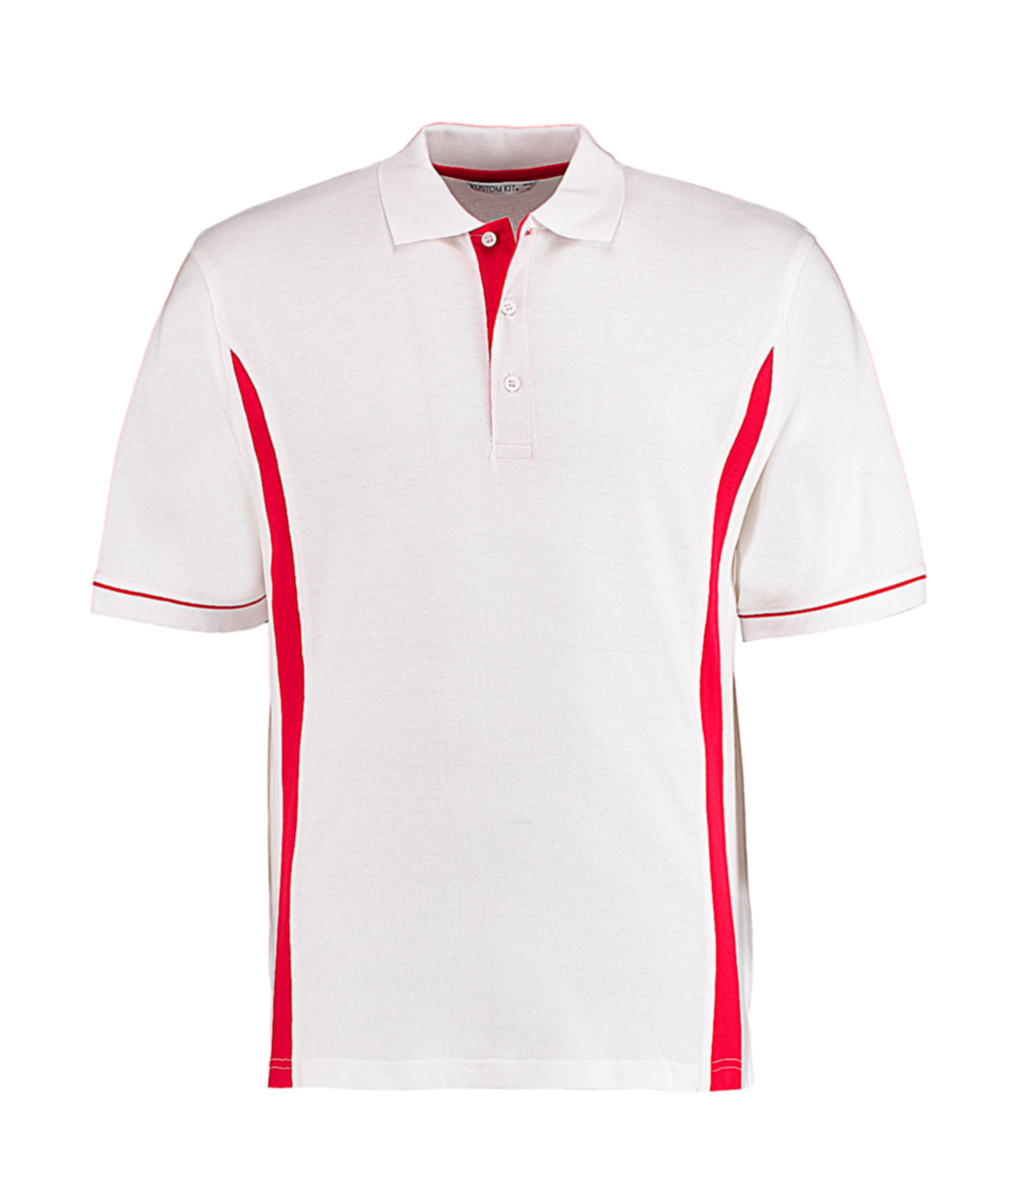  Scottsdale Polo in Farbe White/Red